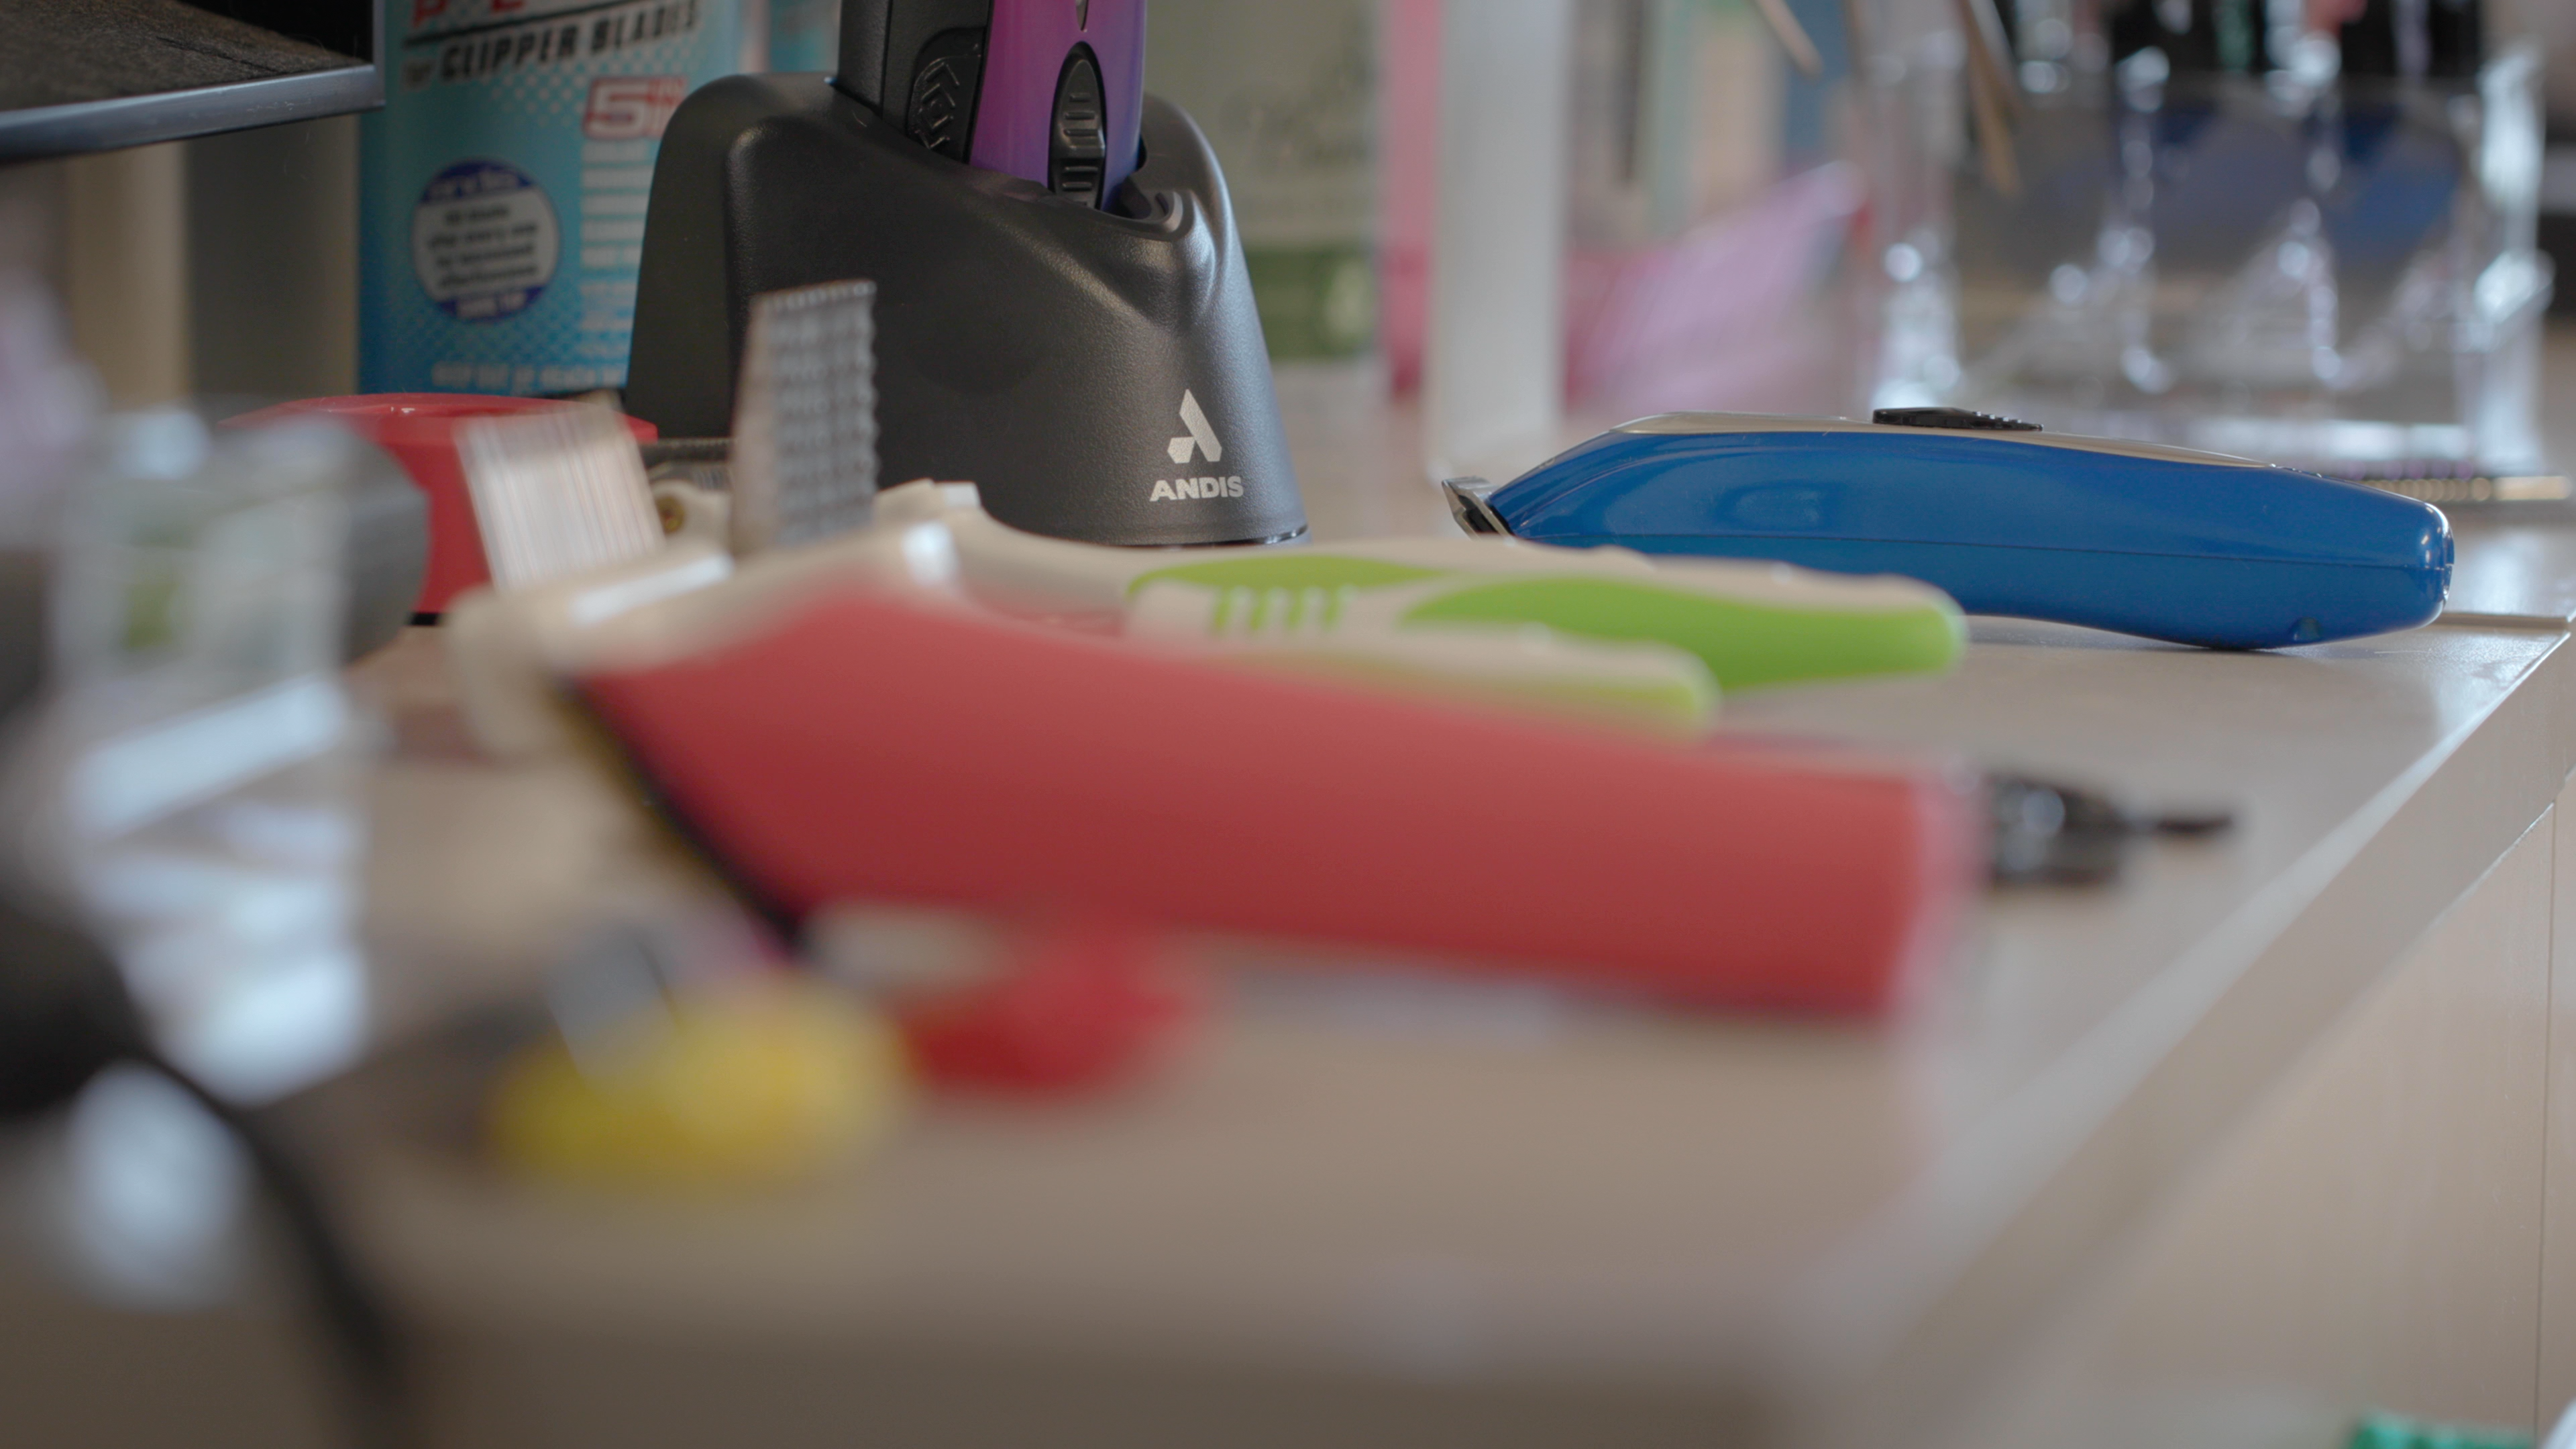 out of focus grooming tools in the foreground and charging dock with Andis logo in focus in the background